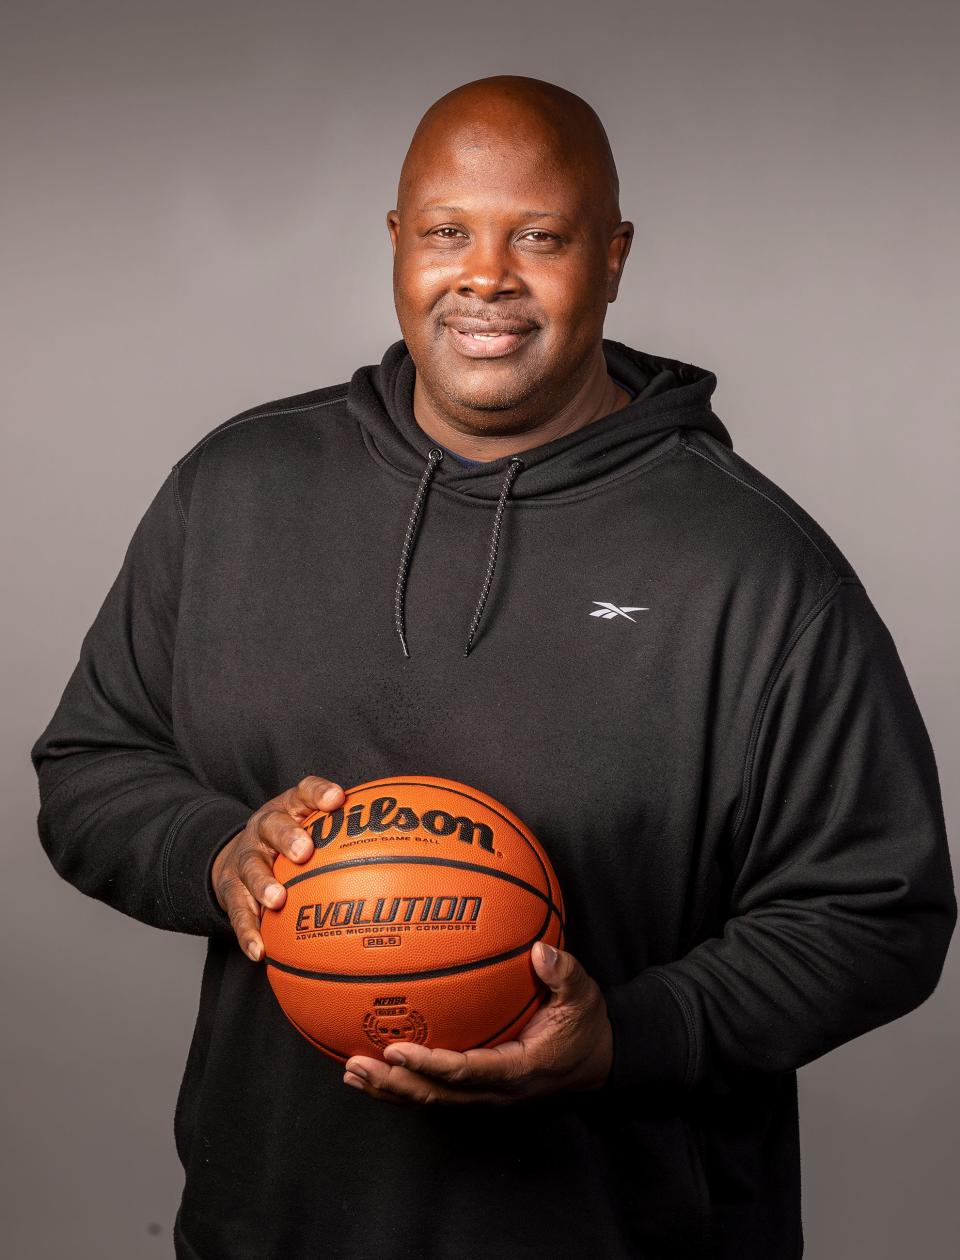 All County Basketball - Winter Haven High School - Coach Johnnie Lawson in Lakeland Fl. Monday March 25, 2024.
Ernst Peters/The Ledger